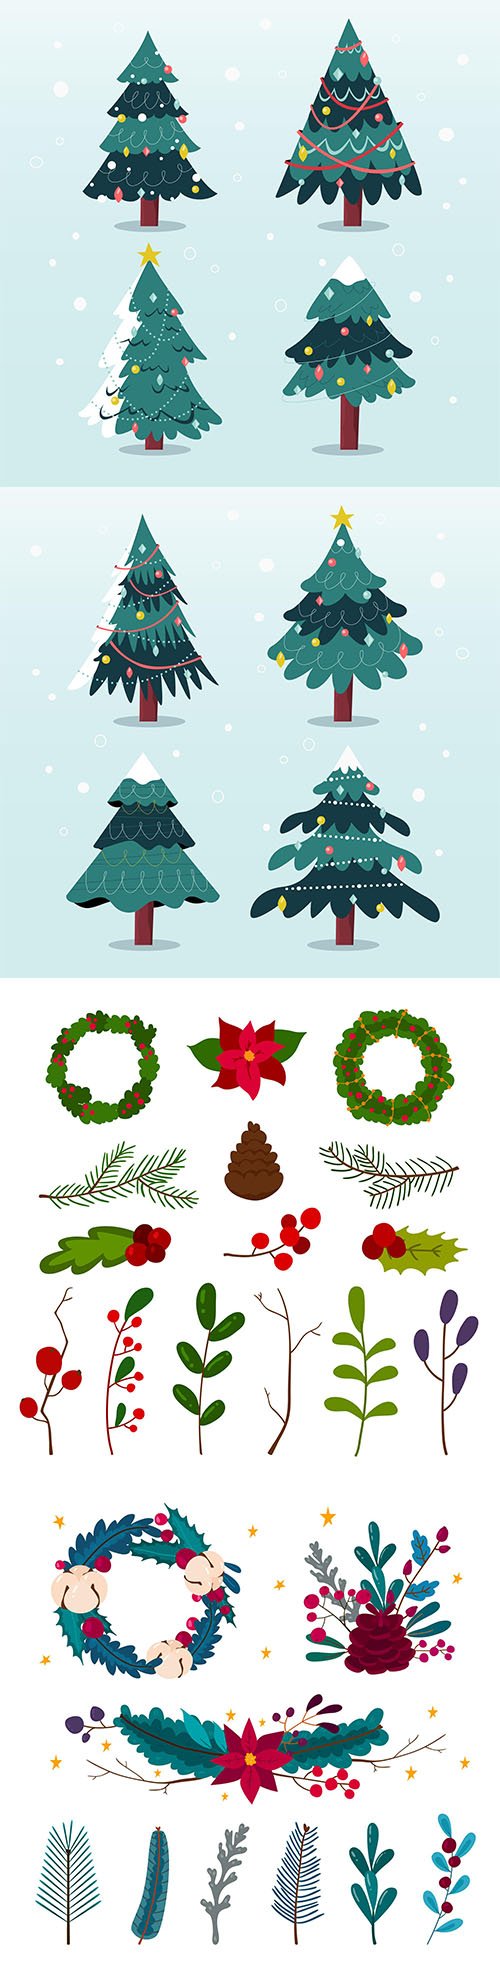 Flat design christmas tree collection